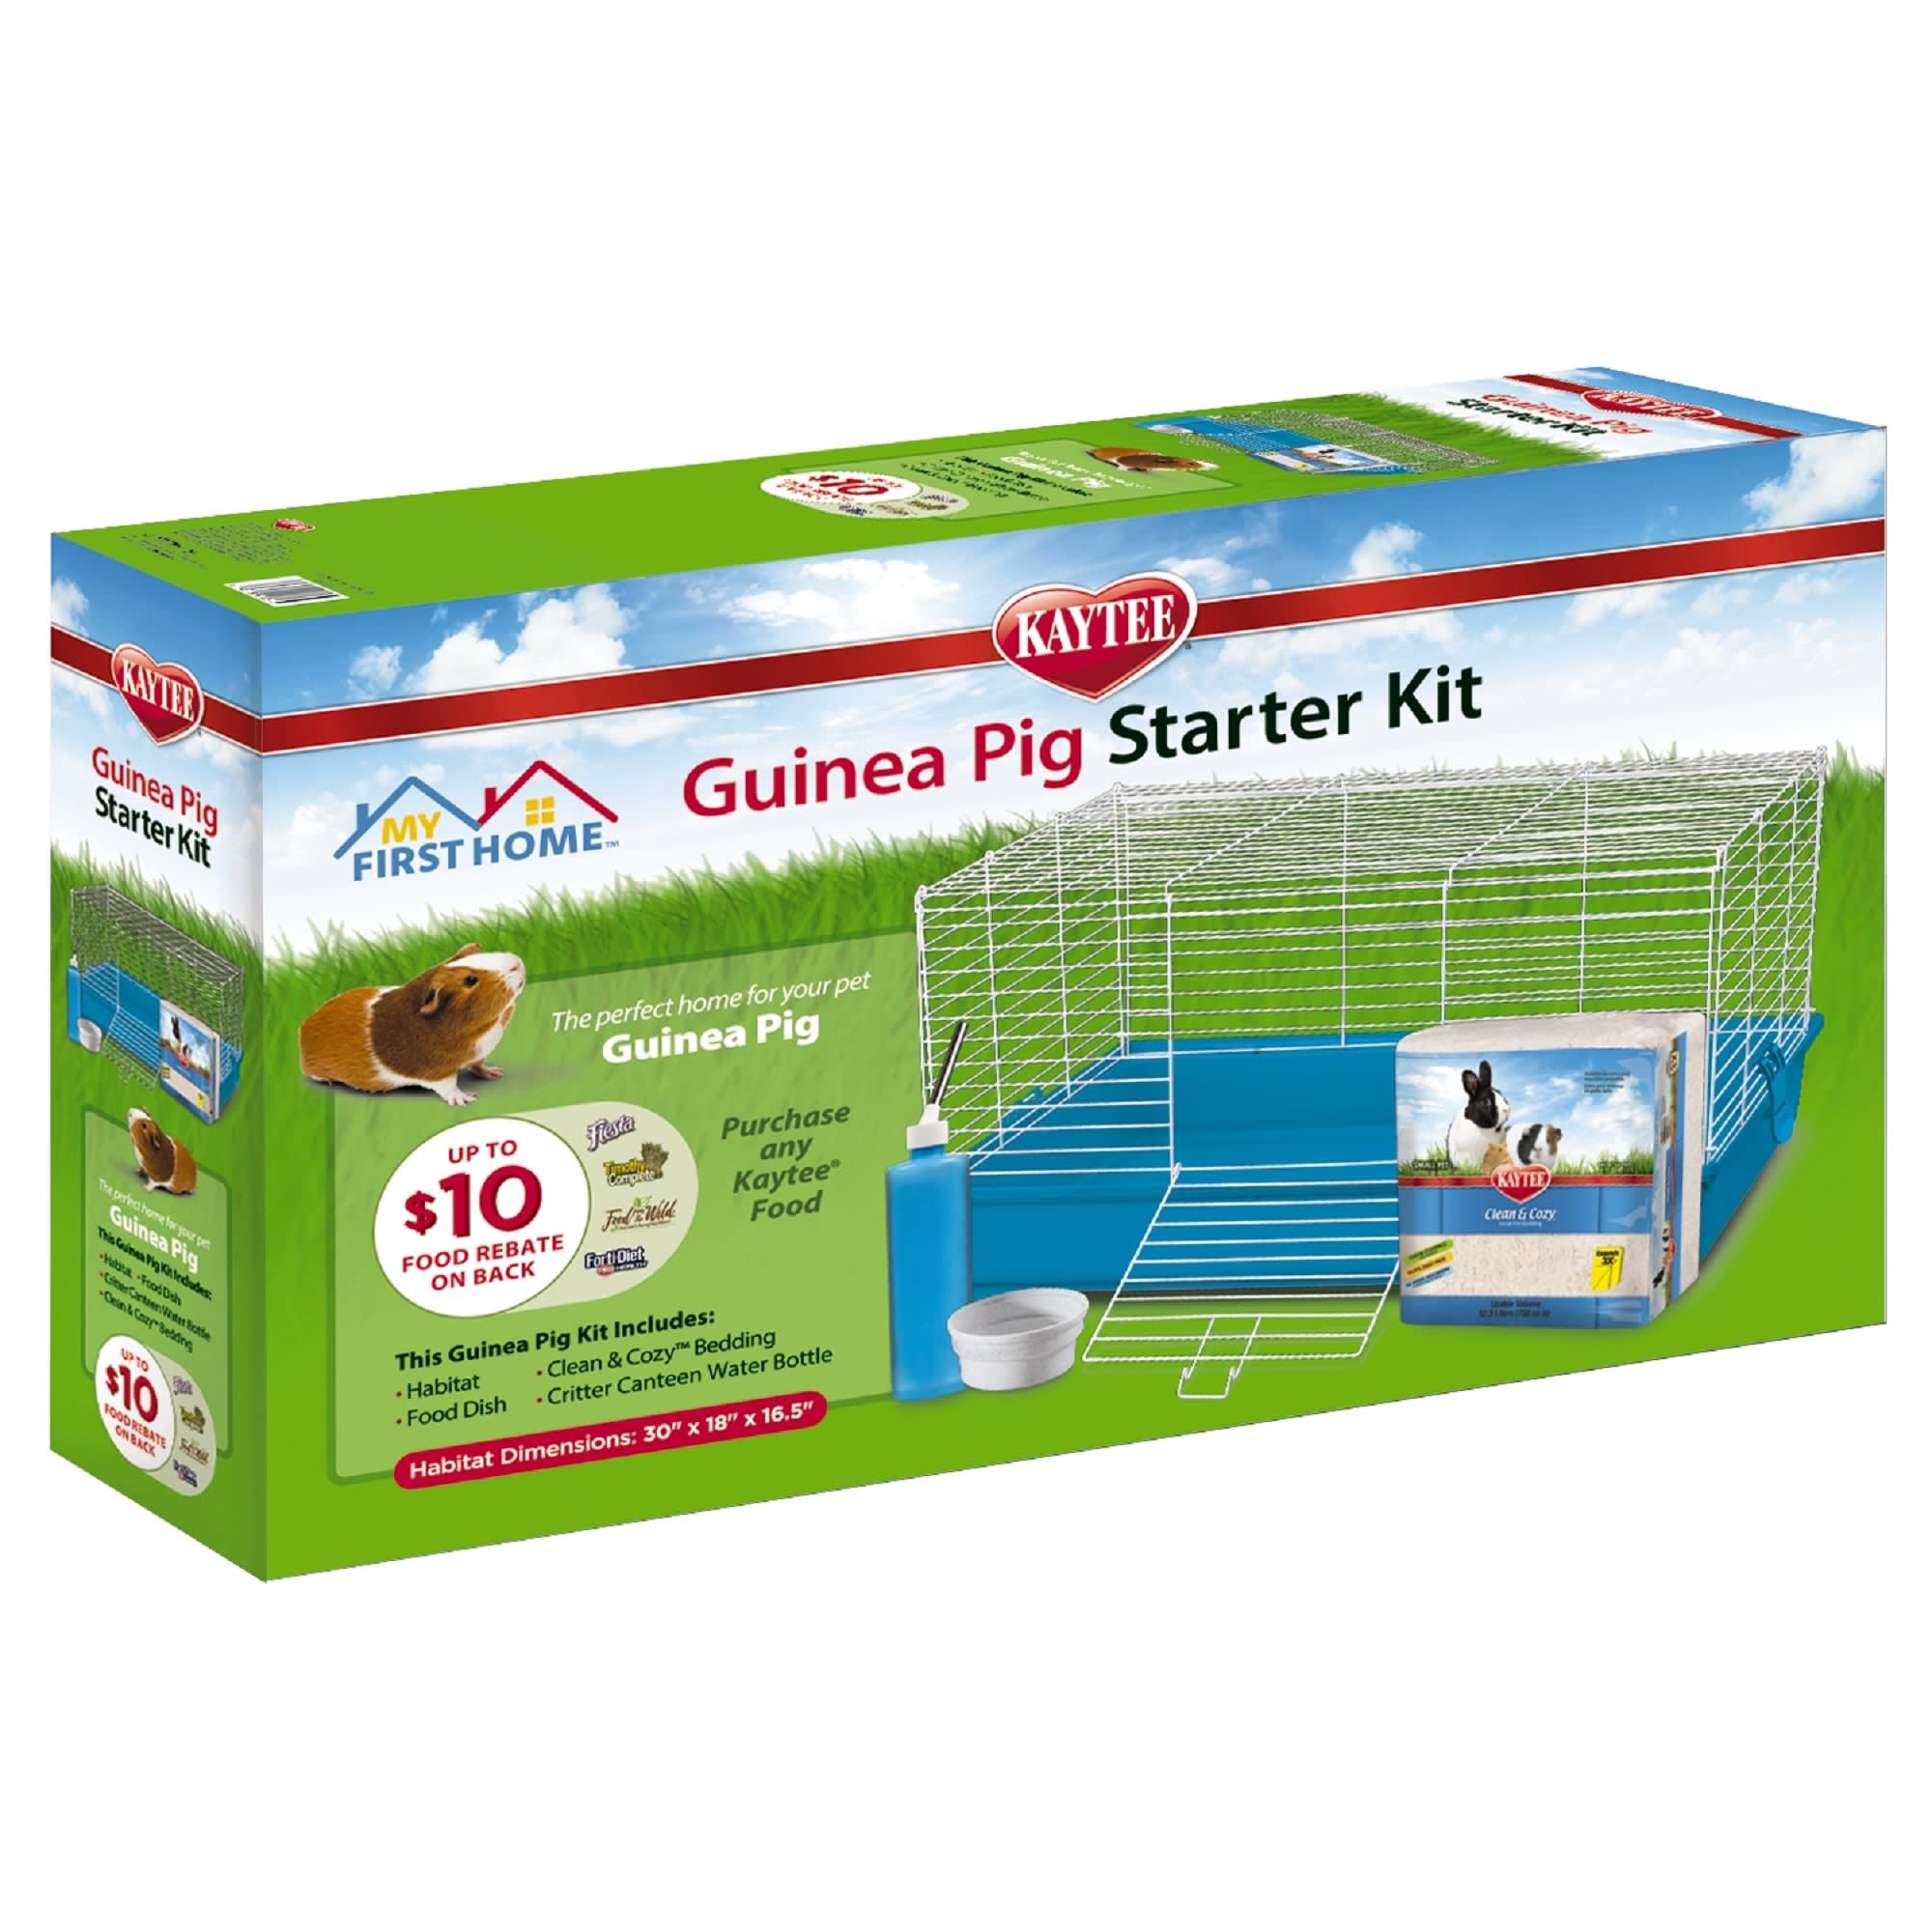 Photos - Rodent Cage / House Kaytee My First Home Guinea Pig Starter Kit, 30" L X 18" W X 16.5" 